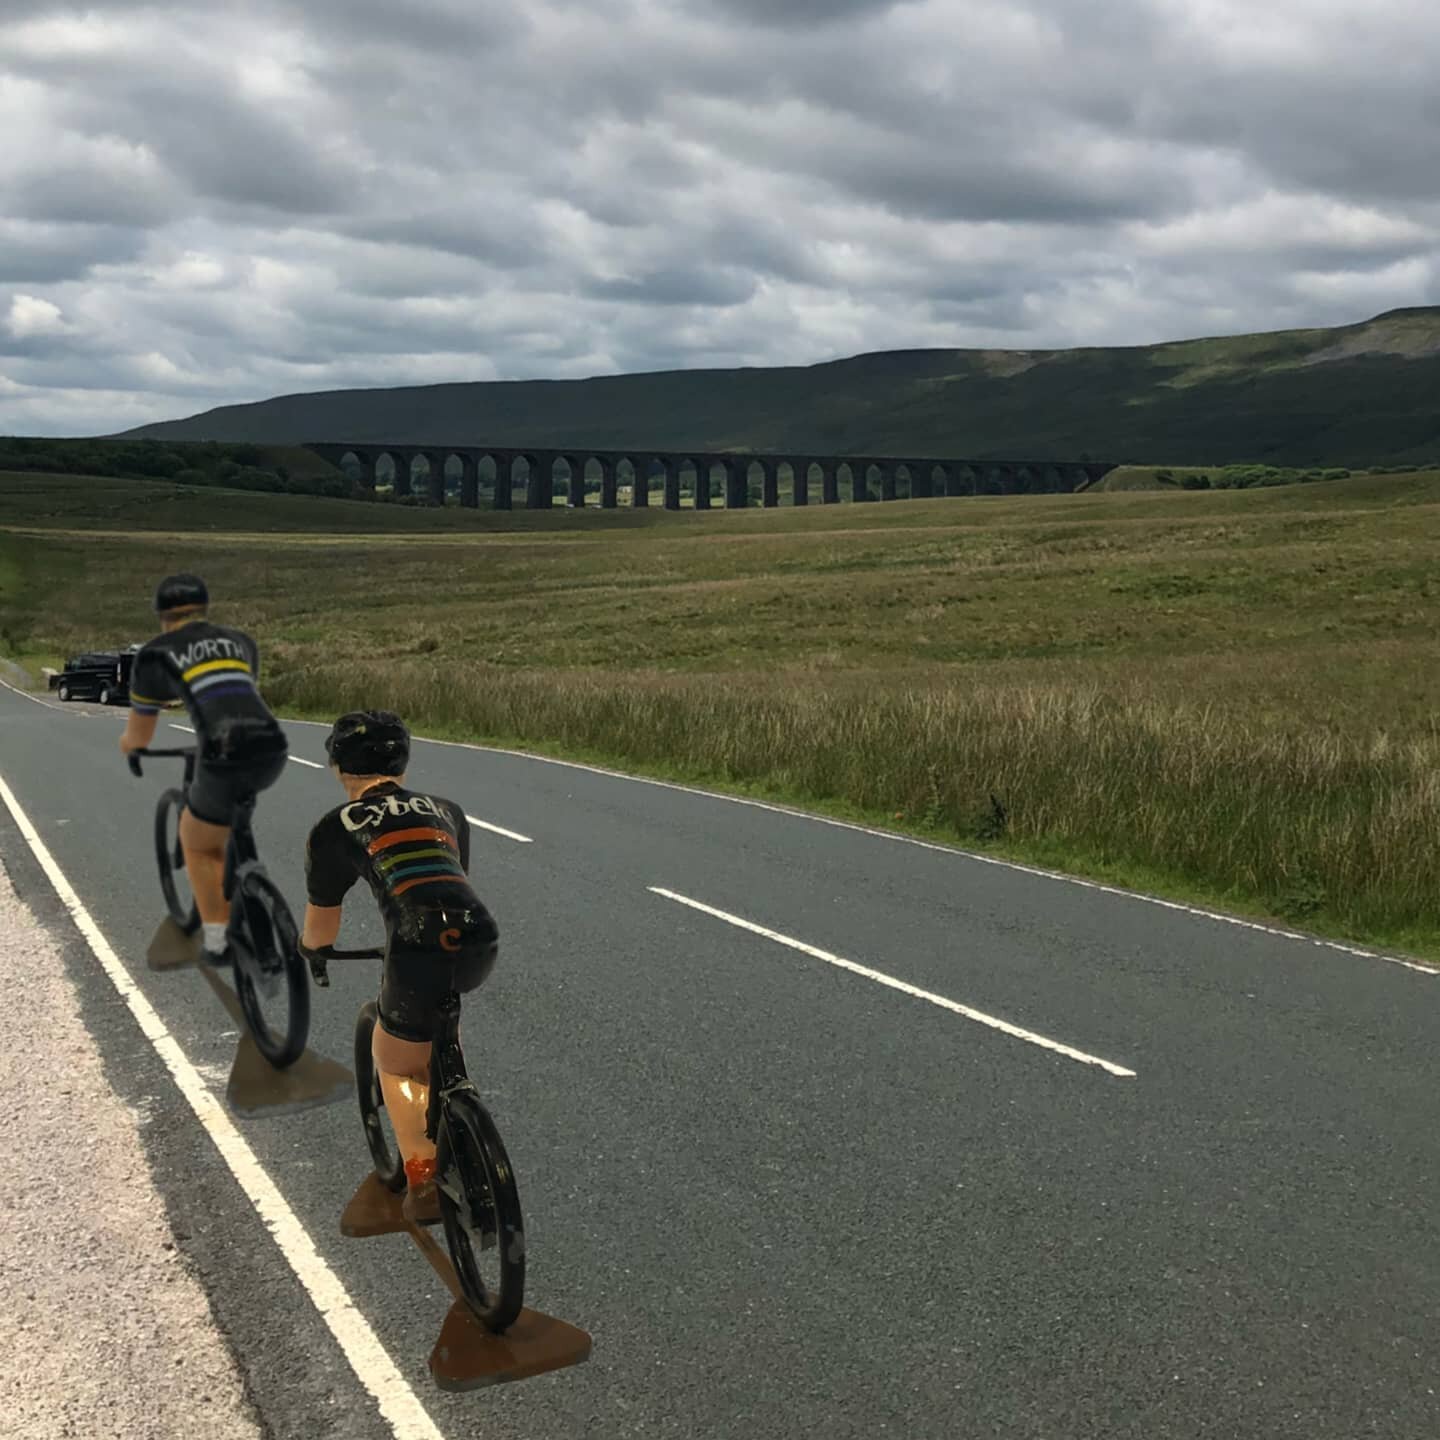 While I've been working away on orders, one of our wonderful collectors has beeen flexing their own creative muscles with these fantastic edits! 🚴 A great use of lockdown time! How great do these riders look on the open road!? 🙌 #modelcyclist #them